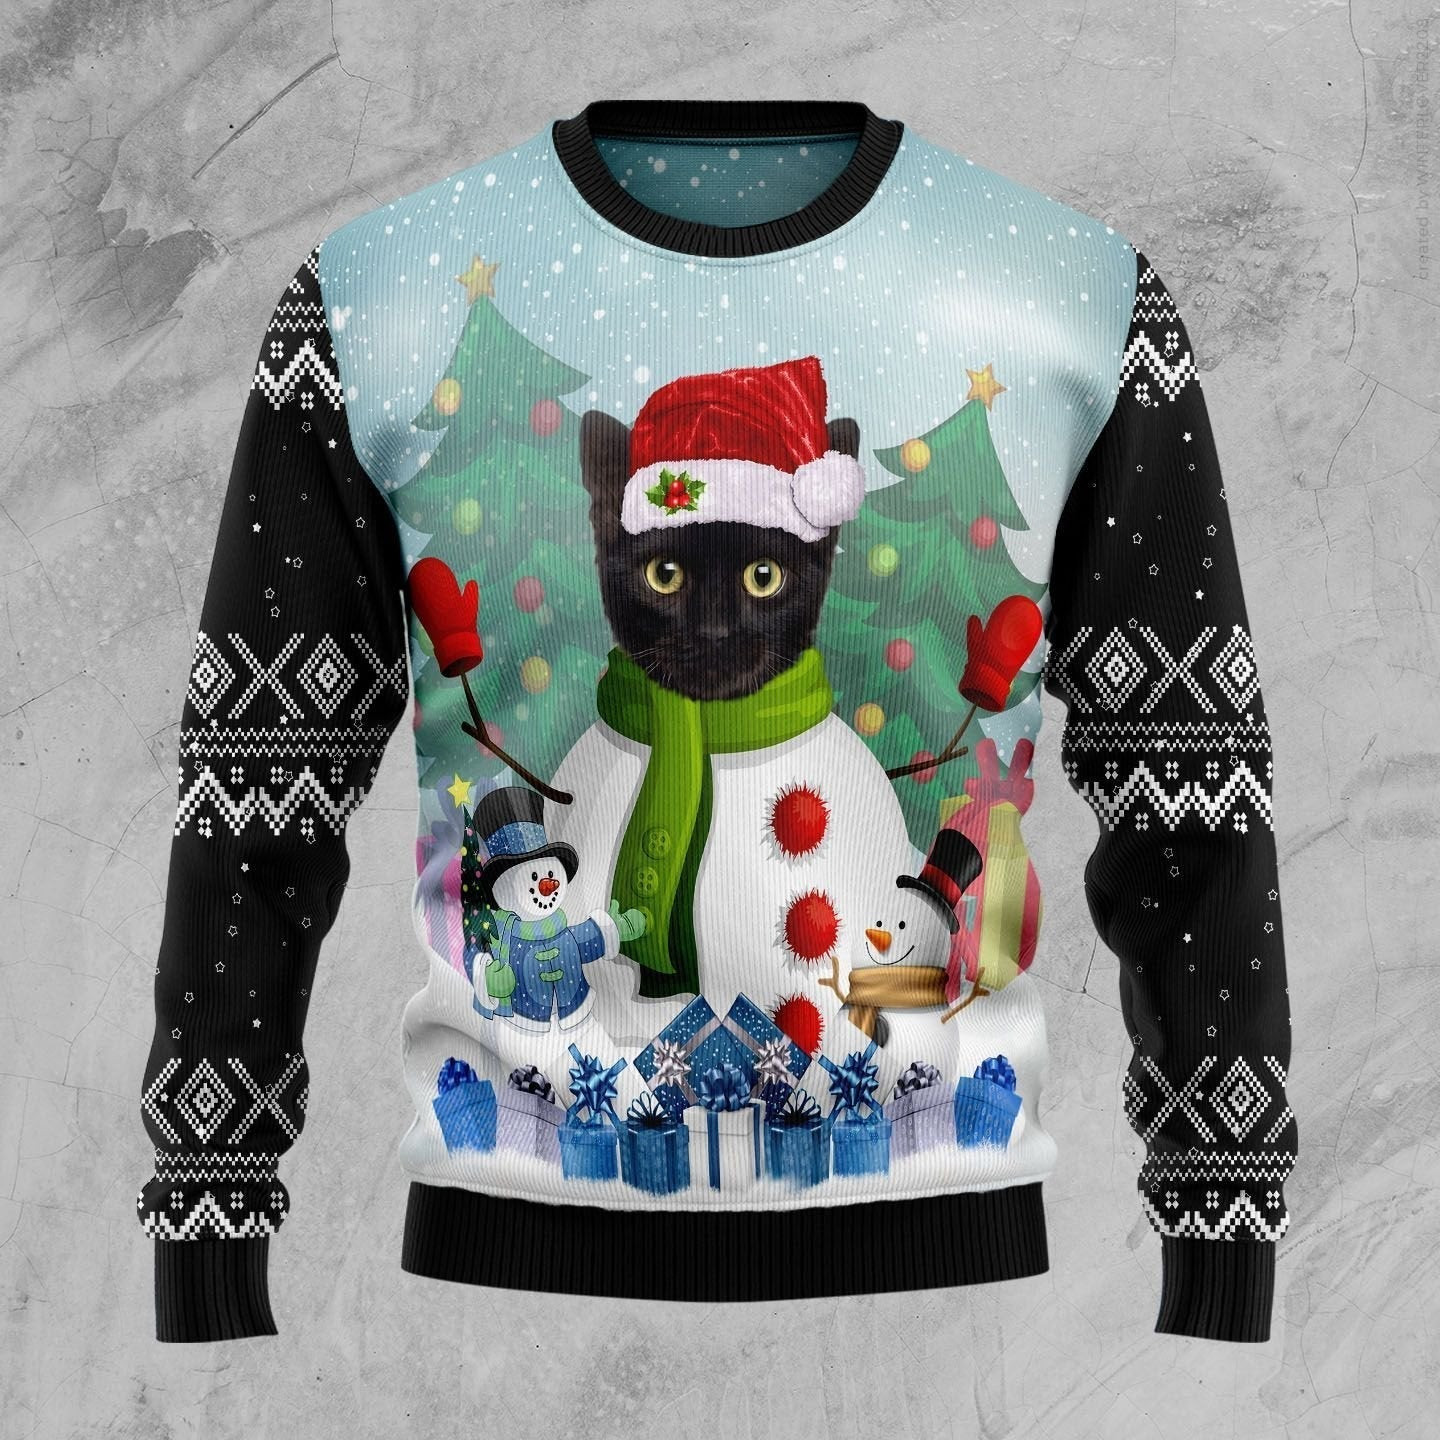 Cat Snowman Ugly Christmas Sweater, Ugly Sweater For Men Women, Holiday Sweater